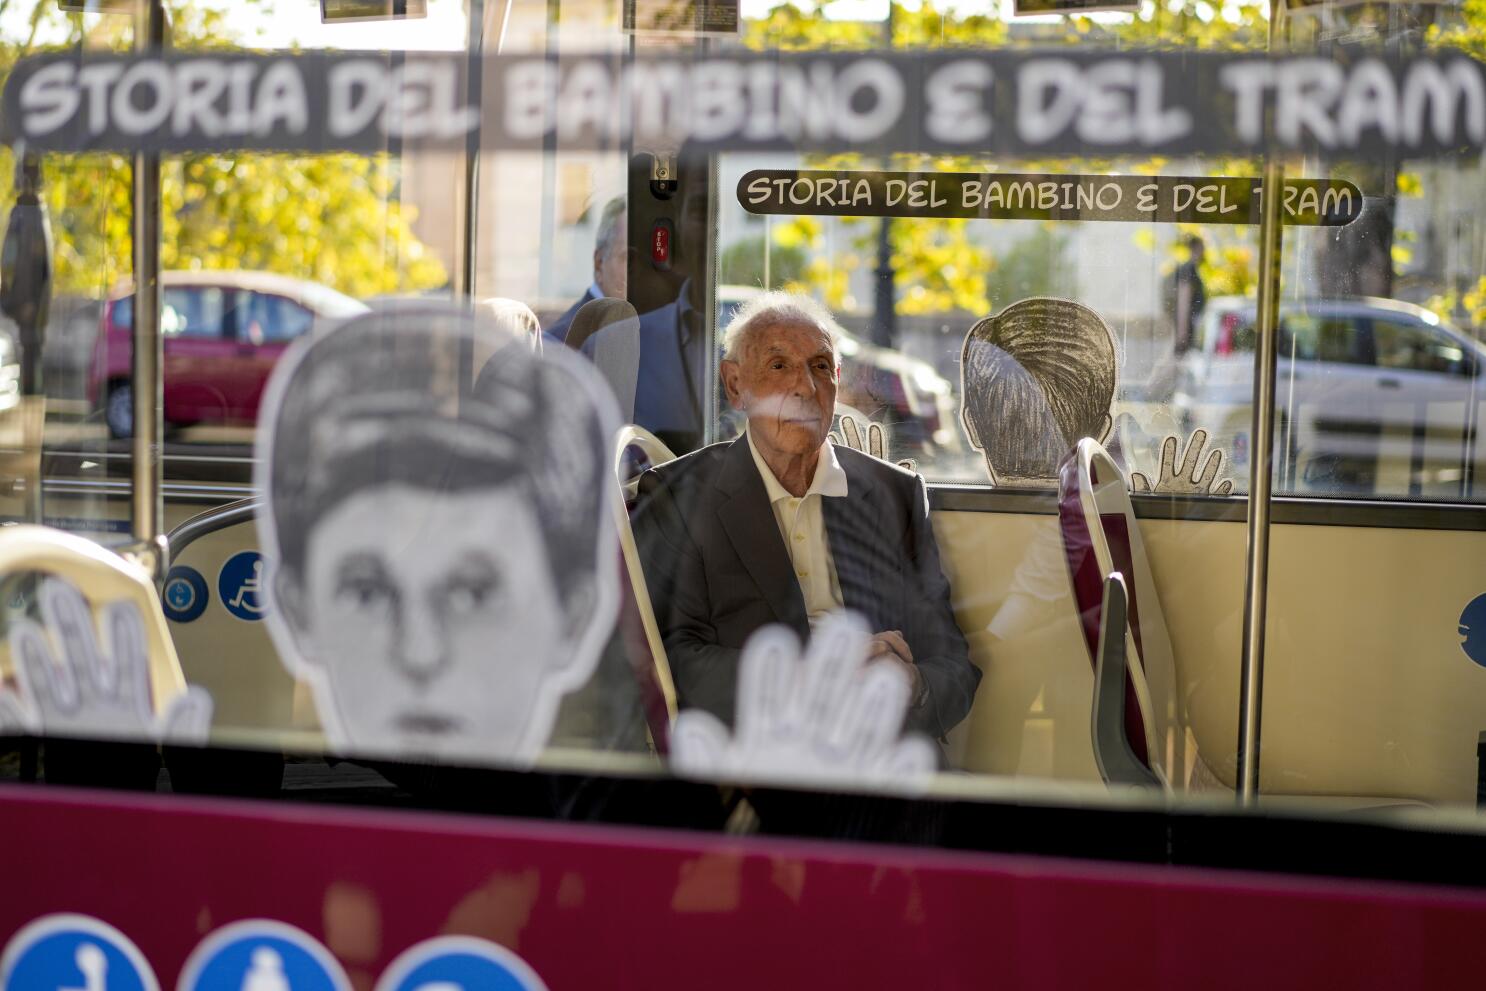 Rome buses recount story of a Jewish boy who avoided Nazi